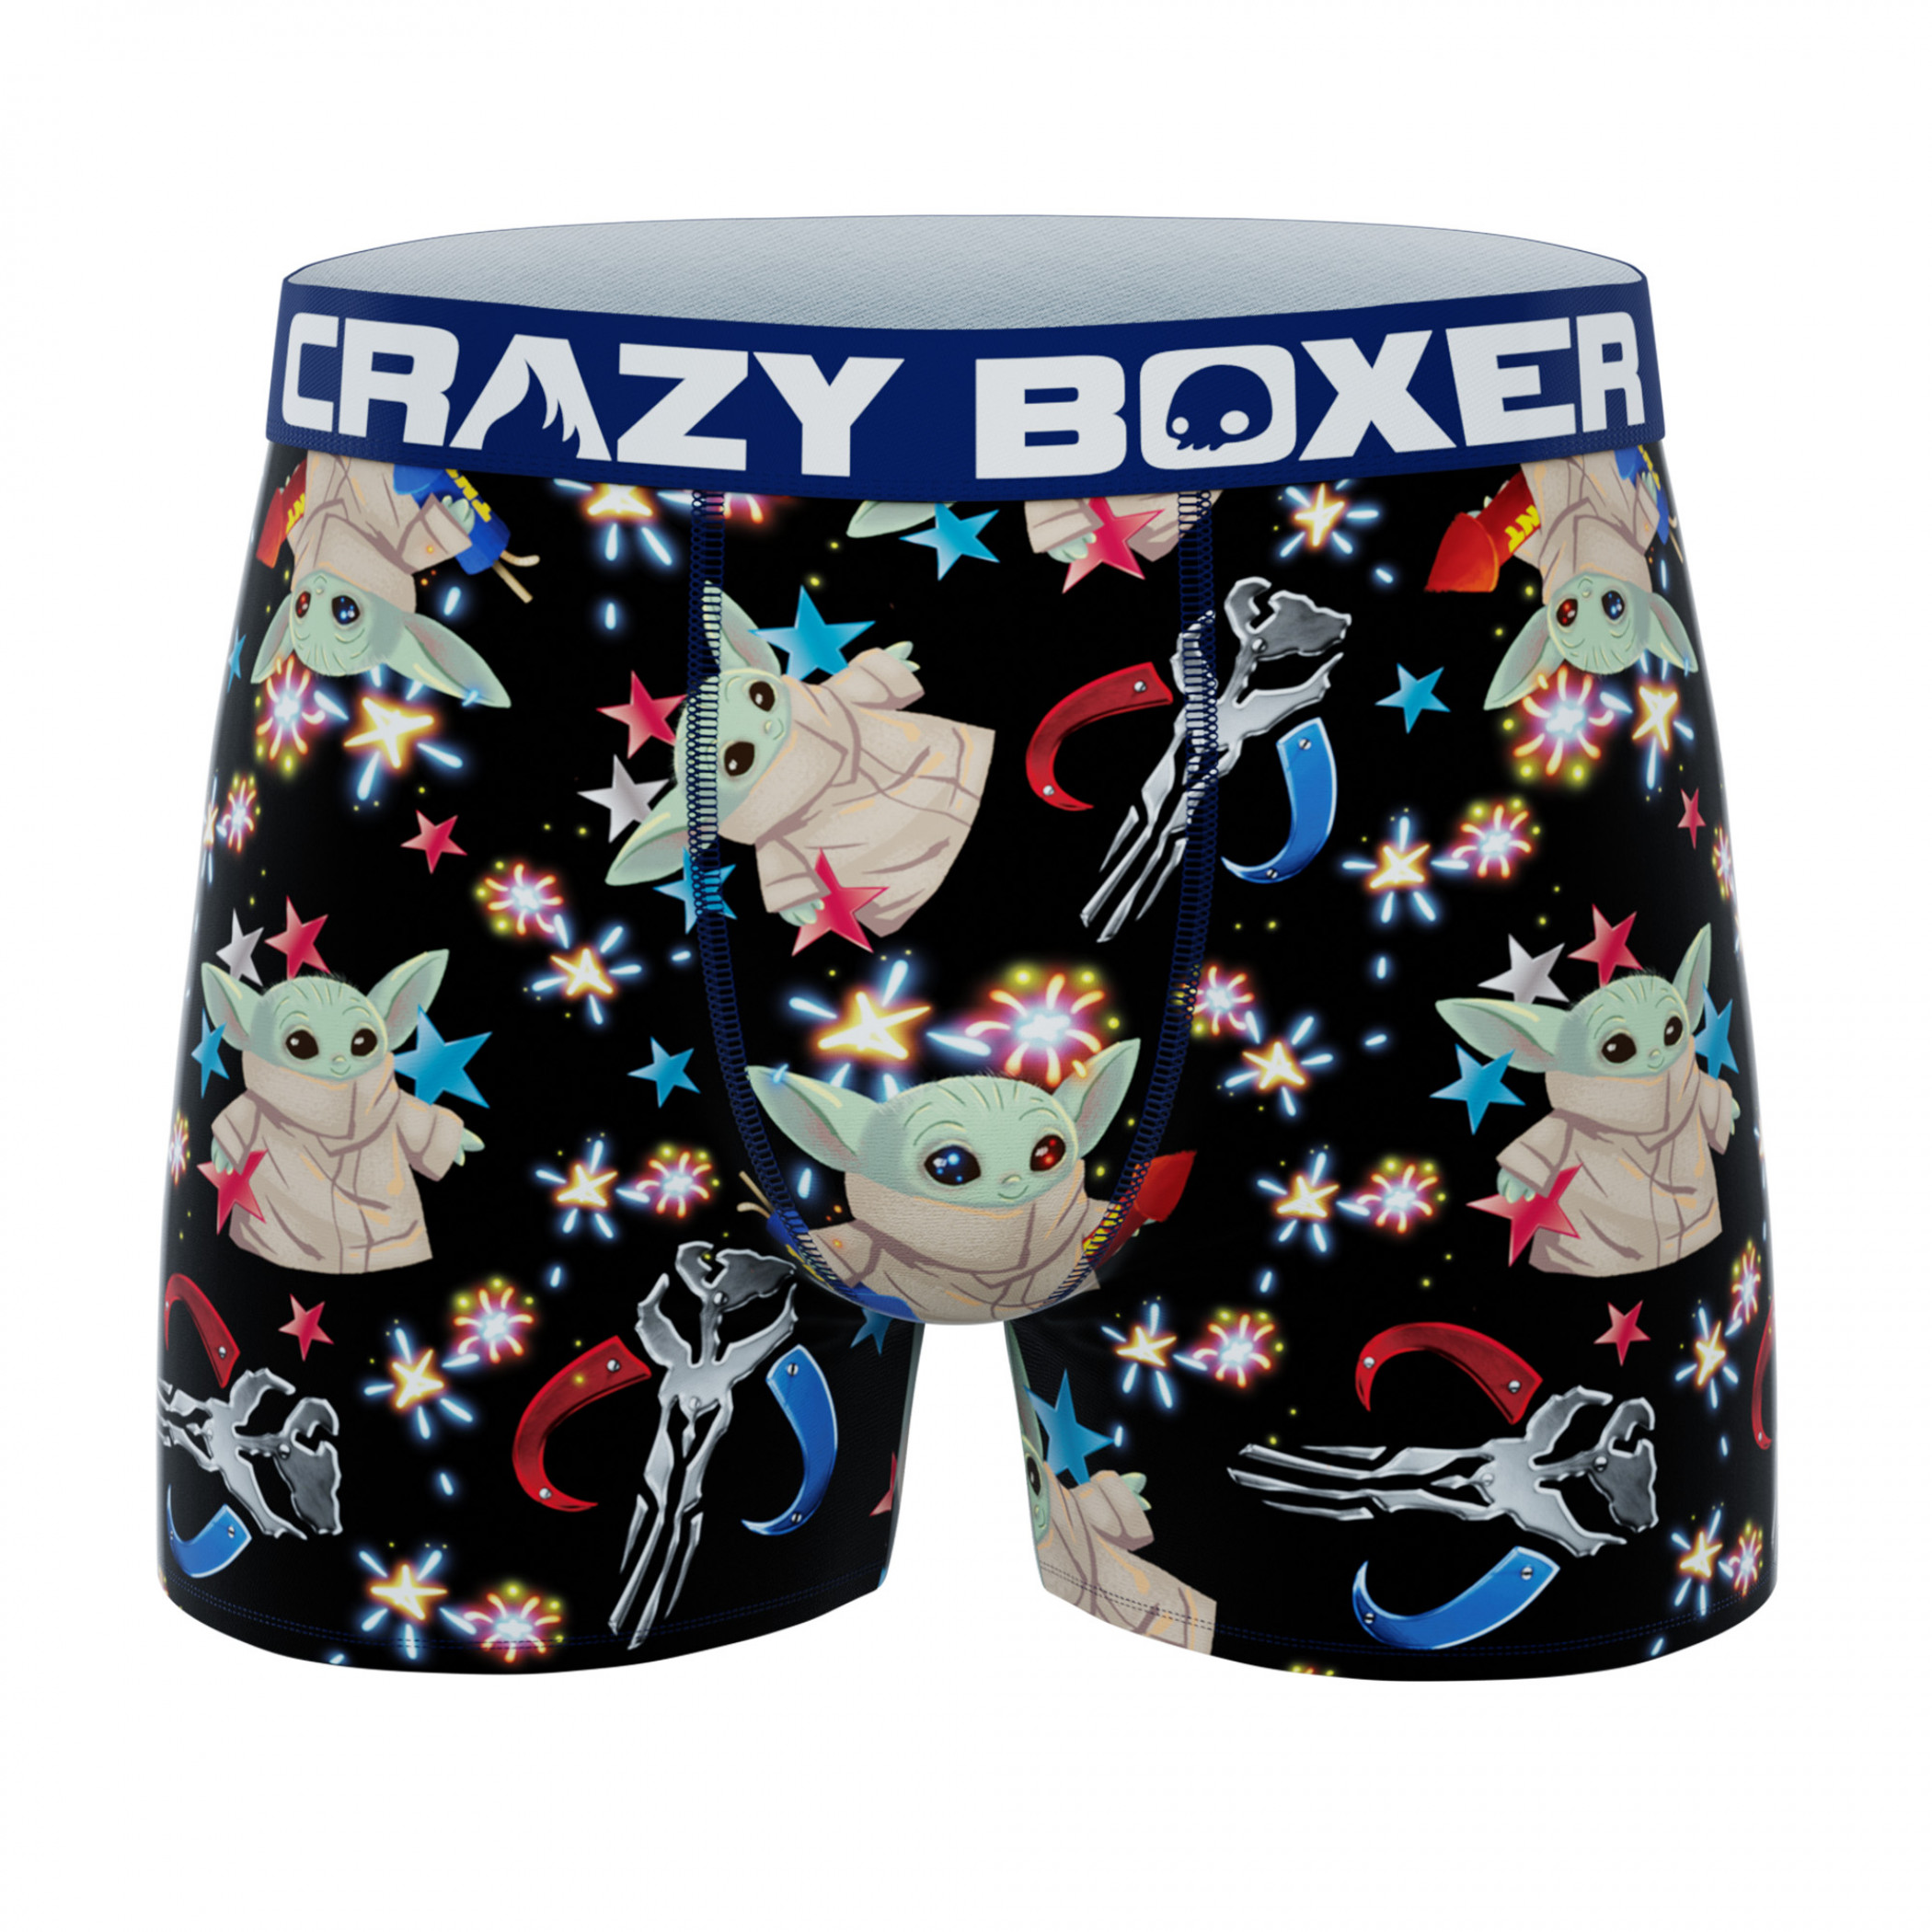 New Crazy Boxer Mens HOME ALONE Briefs Size SMALL With Christmas Gift Box 